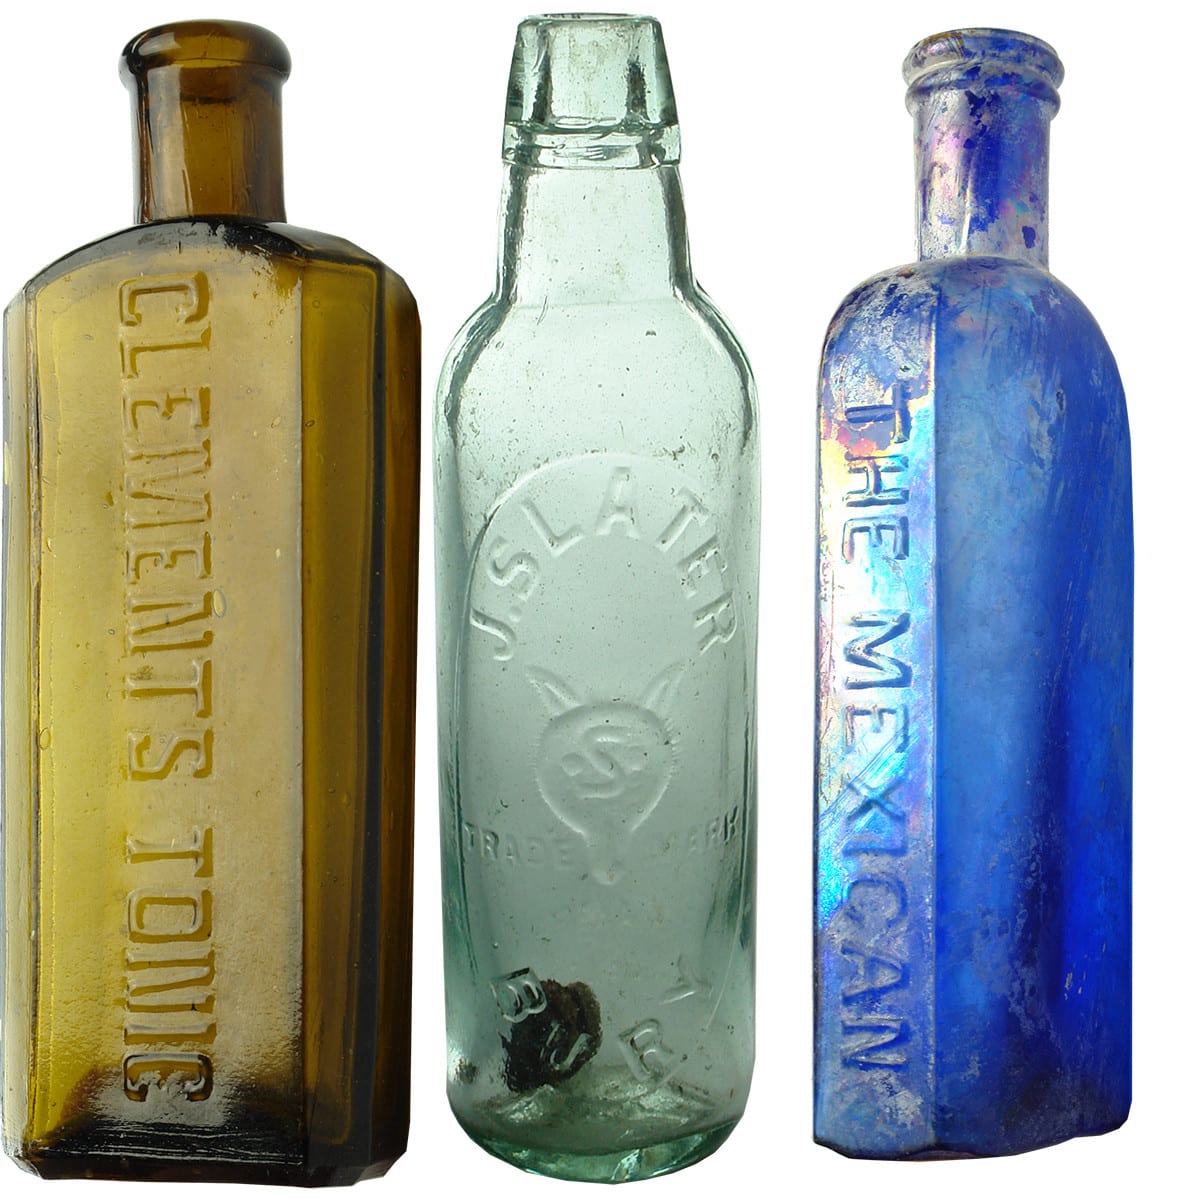 Miscellaneous Bottles: Clement's Tonic; Slater, Bury Lamont; The Mexican Hair Renewer.